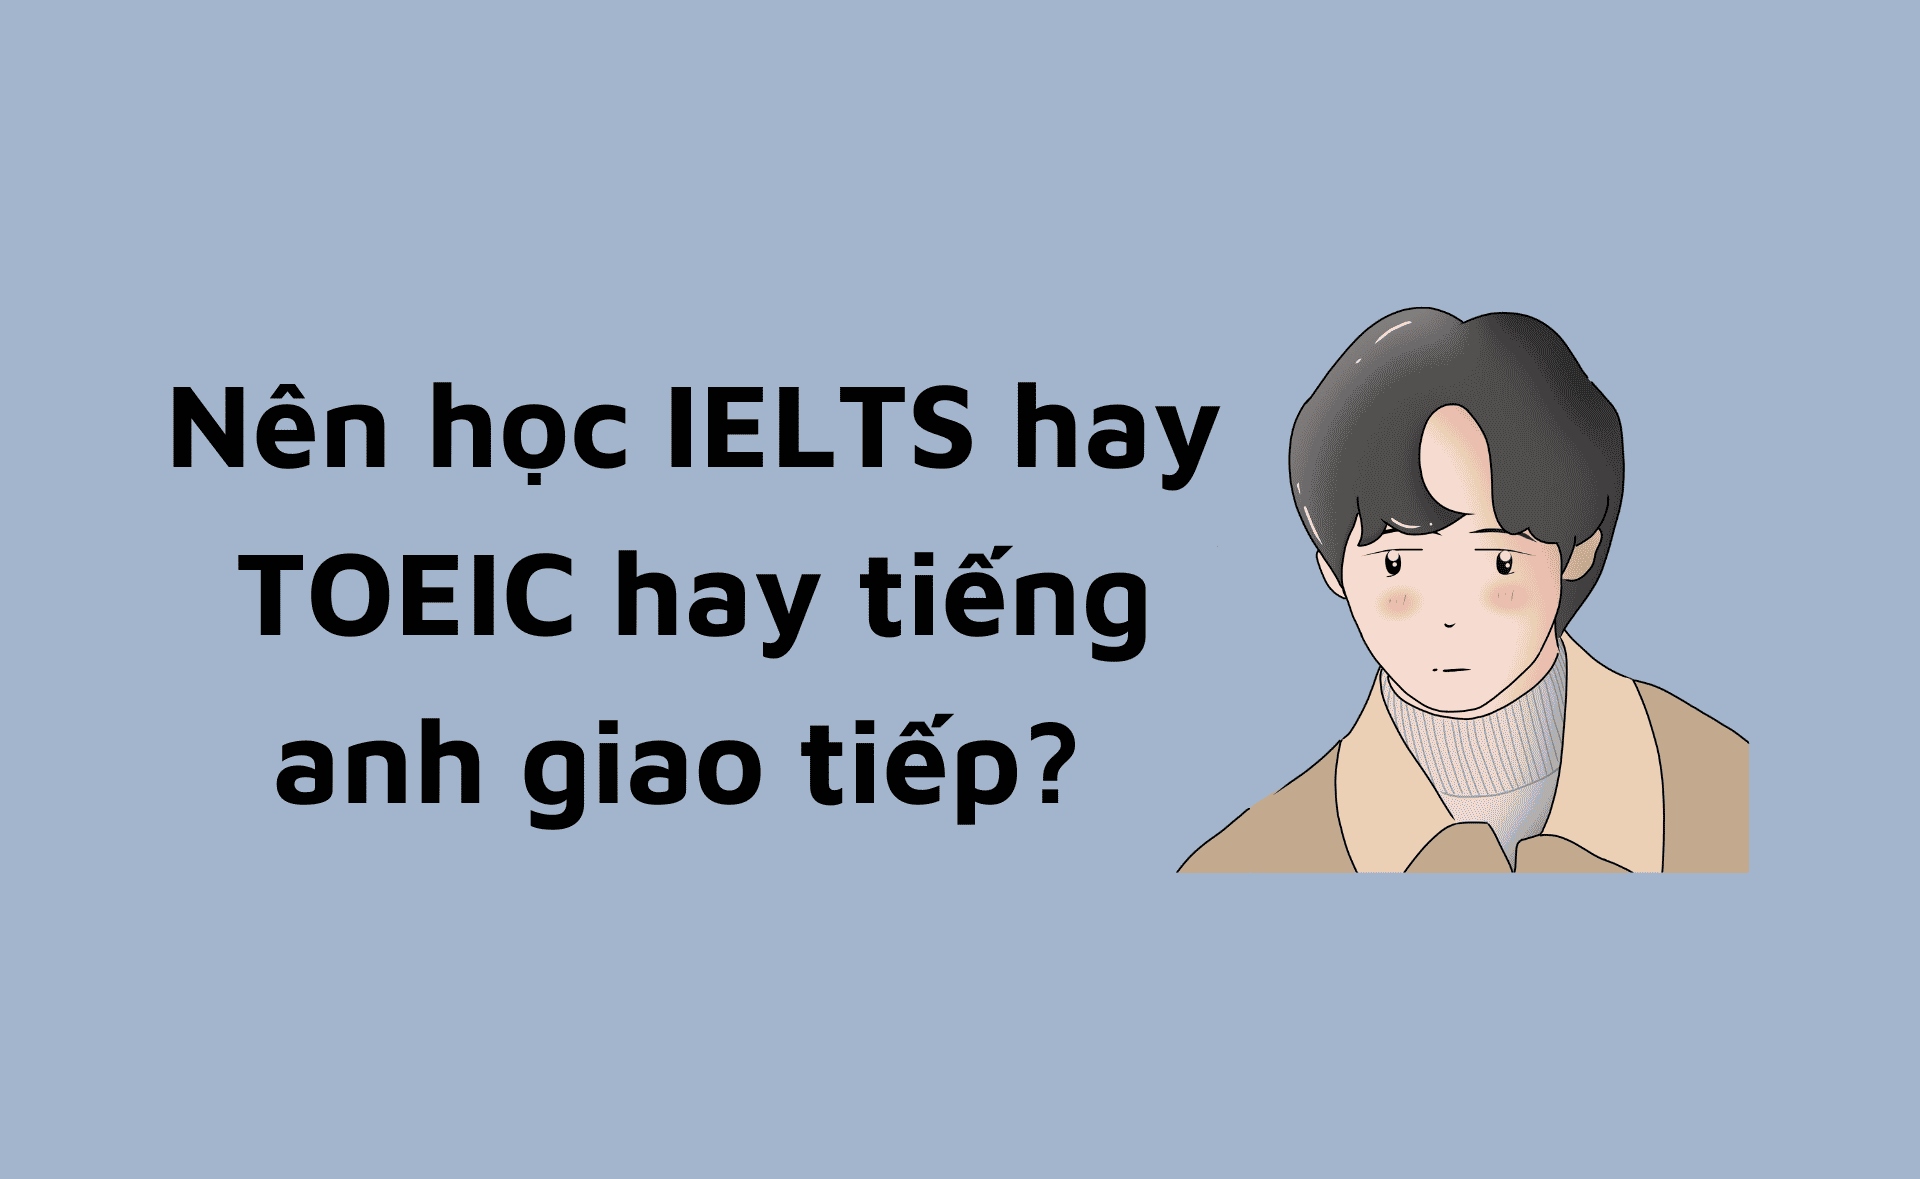 TOEIC, IELTS hay tiếng anh giao tiếp